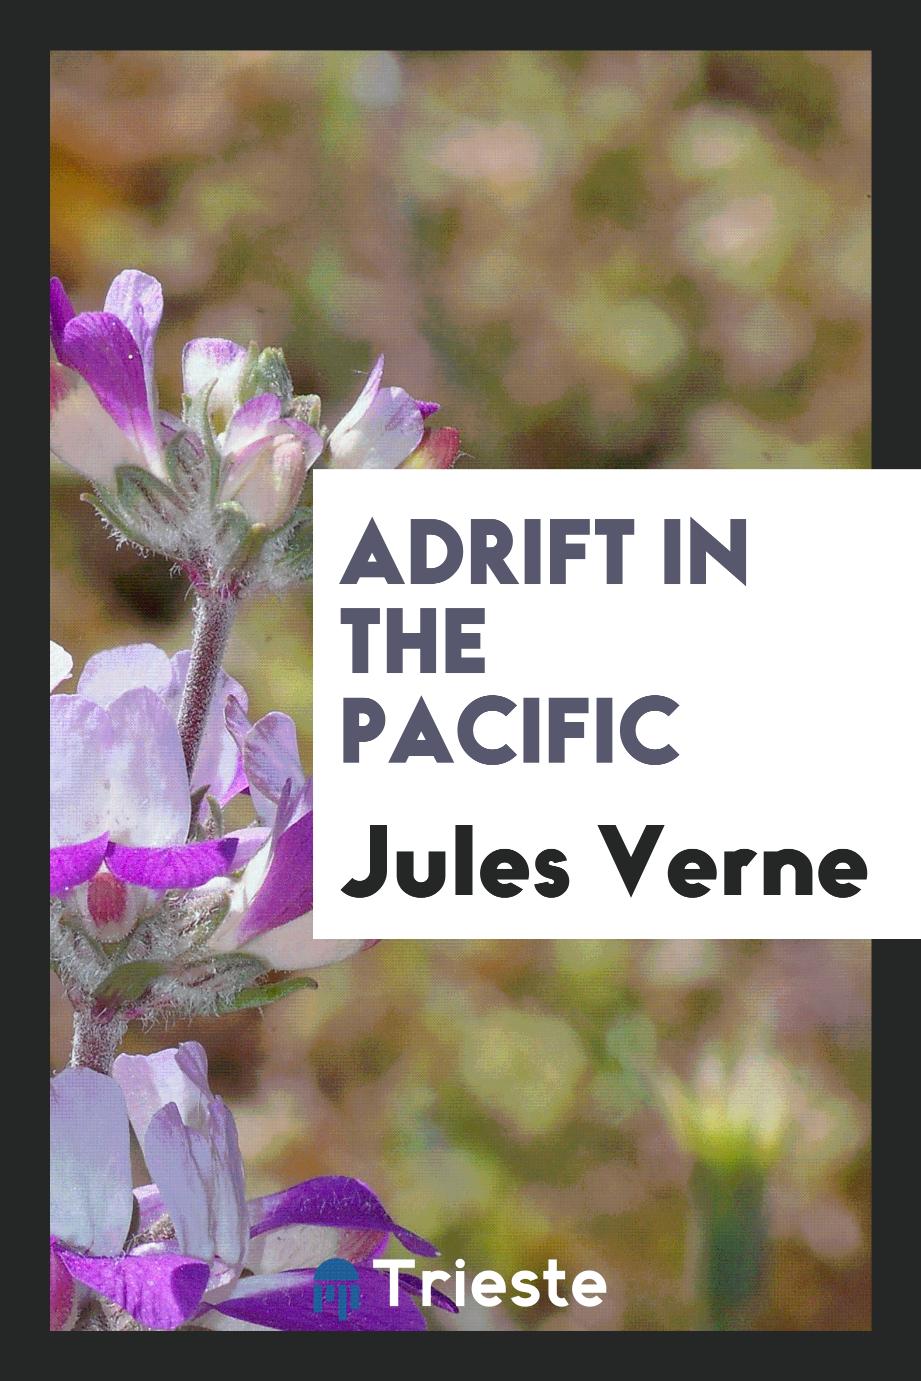 Adrift in the Pacific